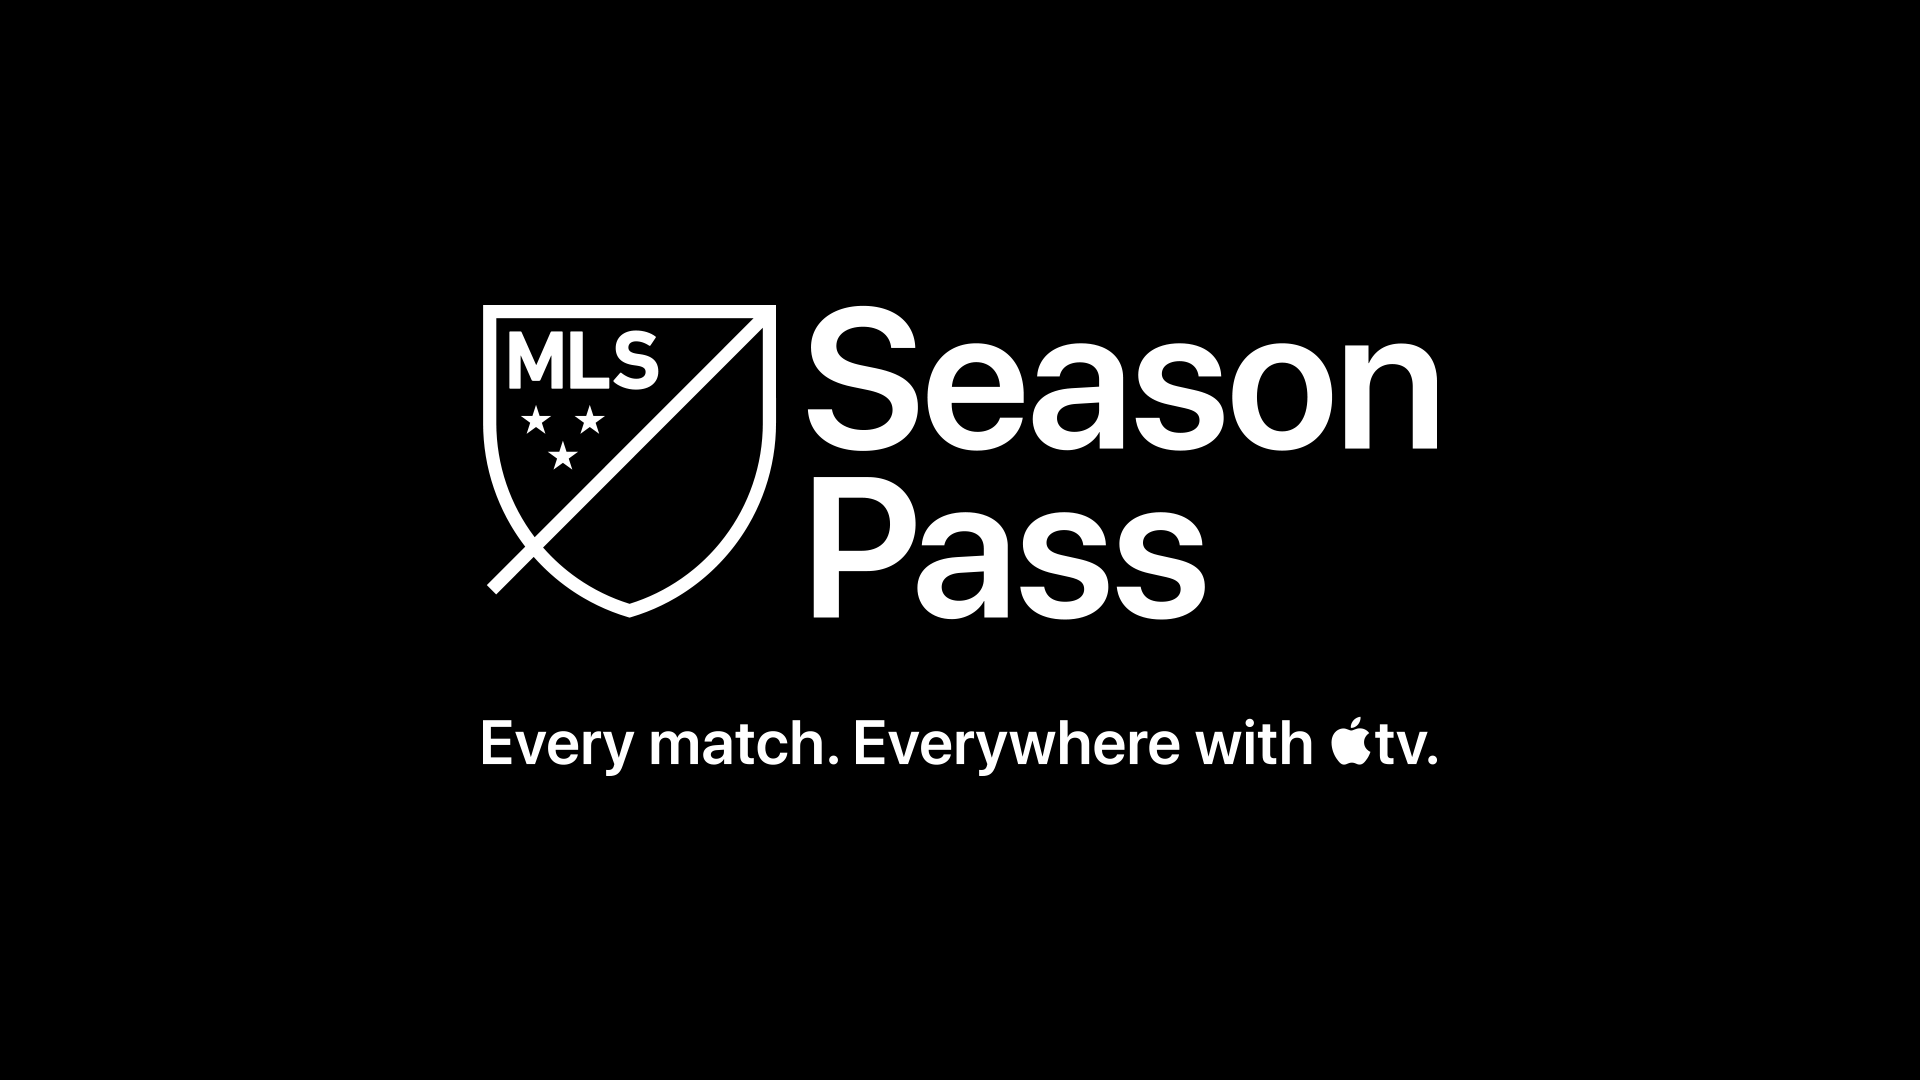 Apple's MLS Season Pass Now Lets You Catch Up on Missed Match Action with Key Plays